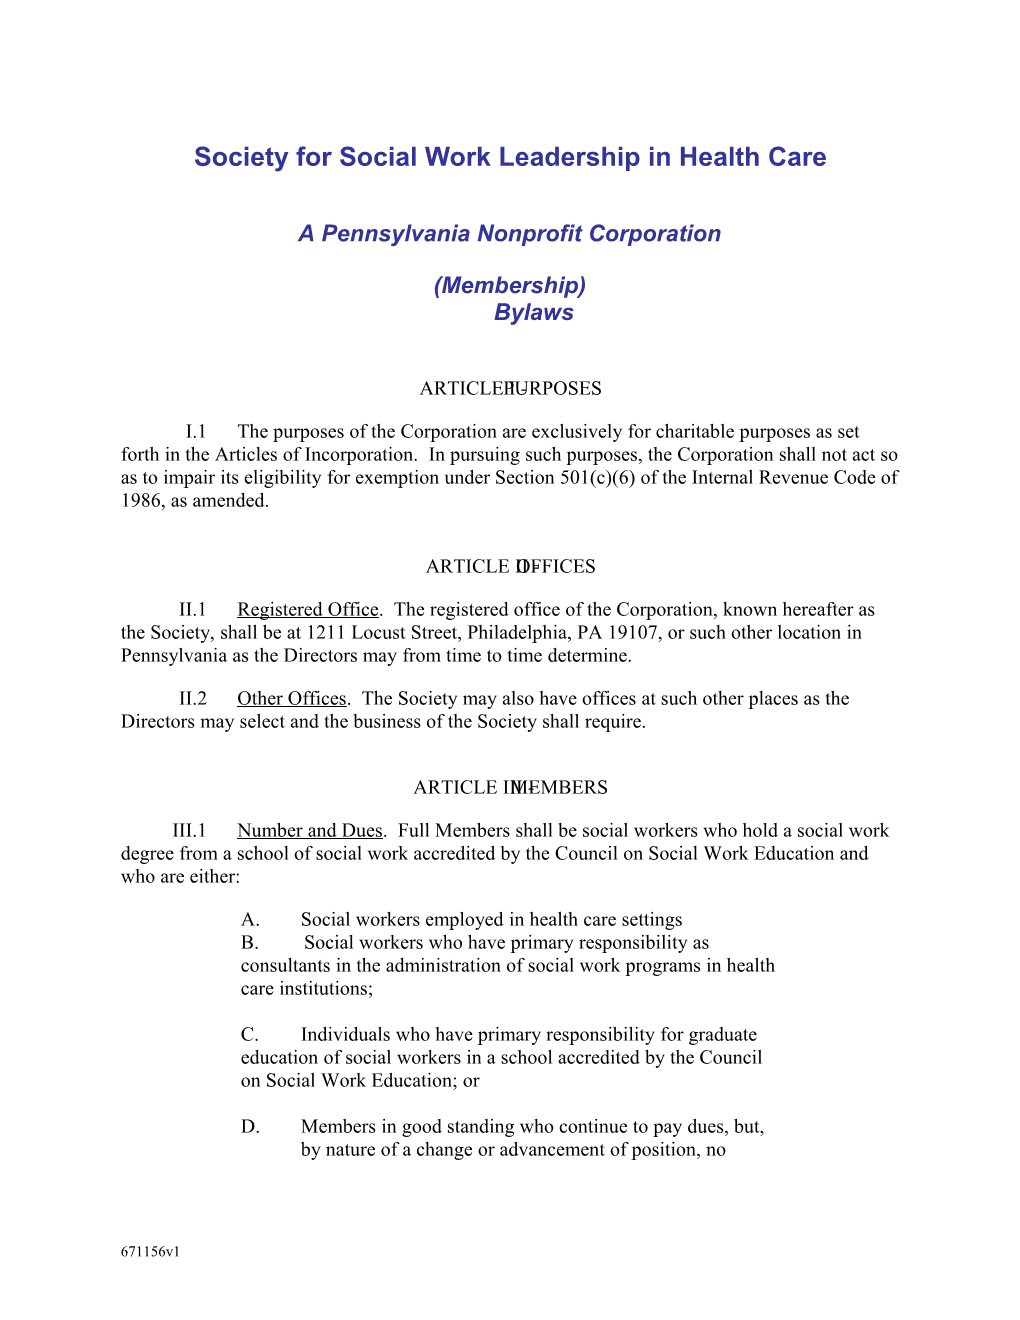 Society for Social Work Leadership in Health Care